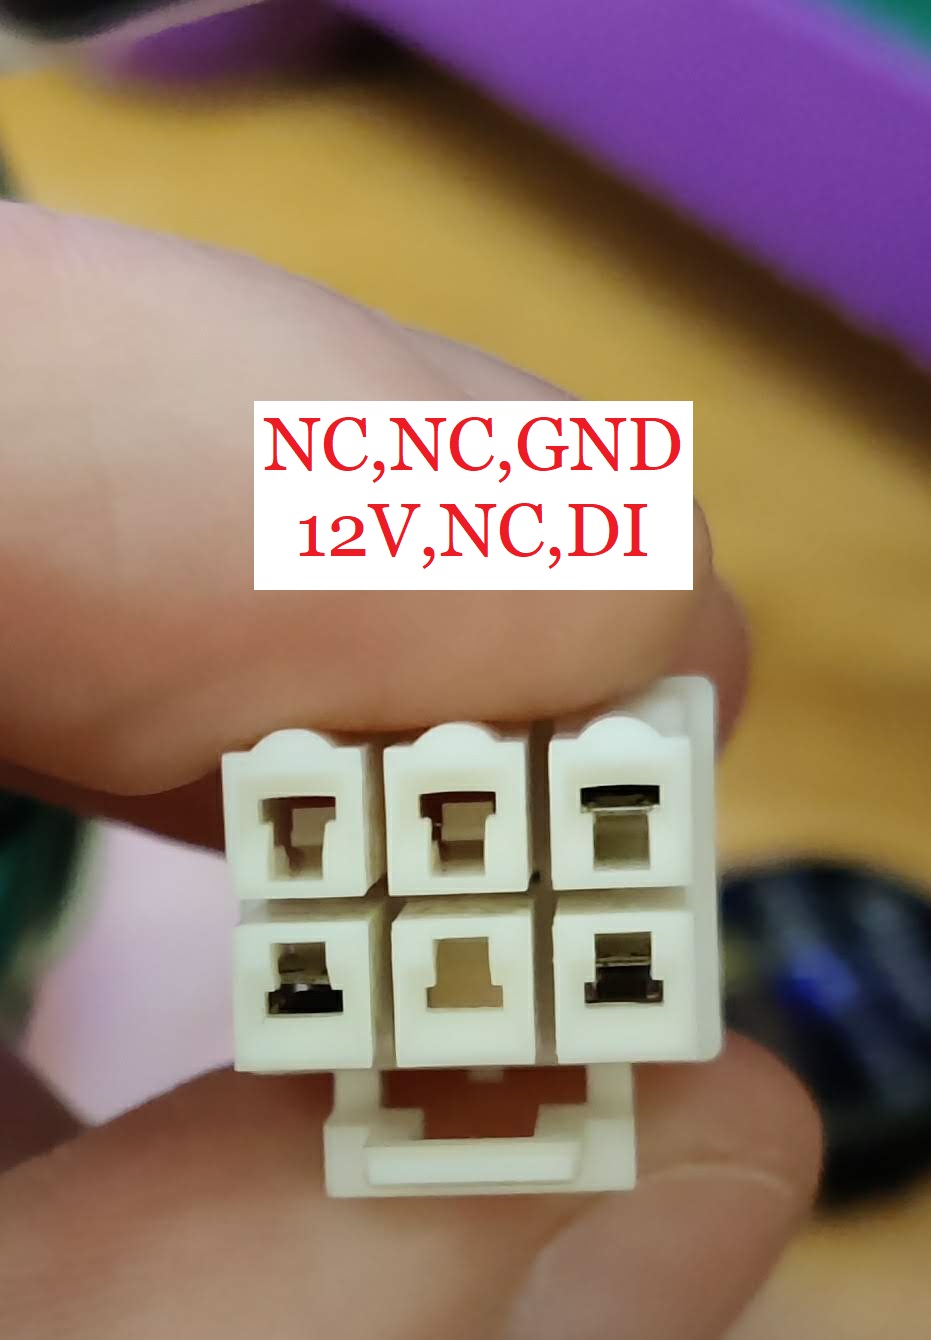 An image showing the LED connector from a chunithm air string unit. The pinout is annotated, left to right, top to bottom, as so: NC, NC, GND, 12V, NC, DI.